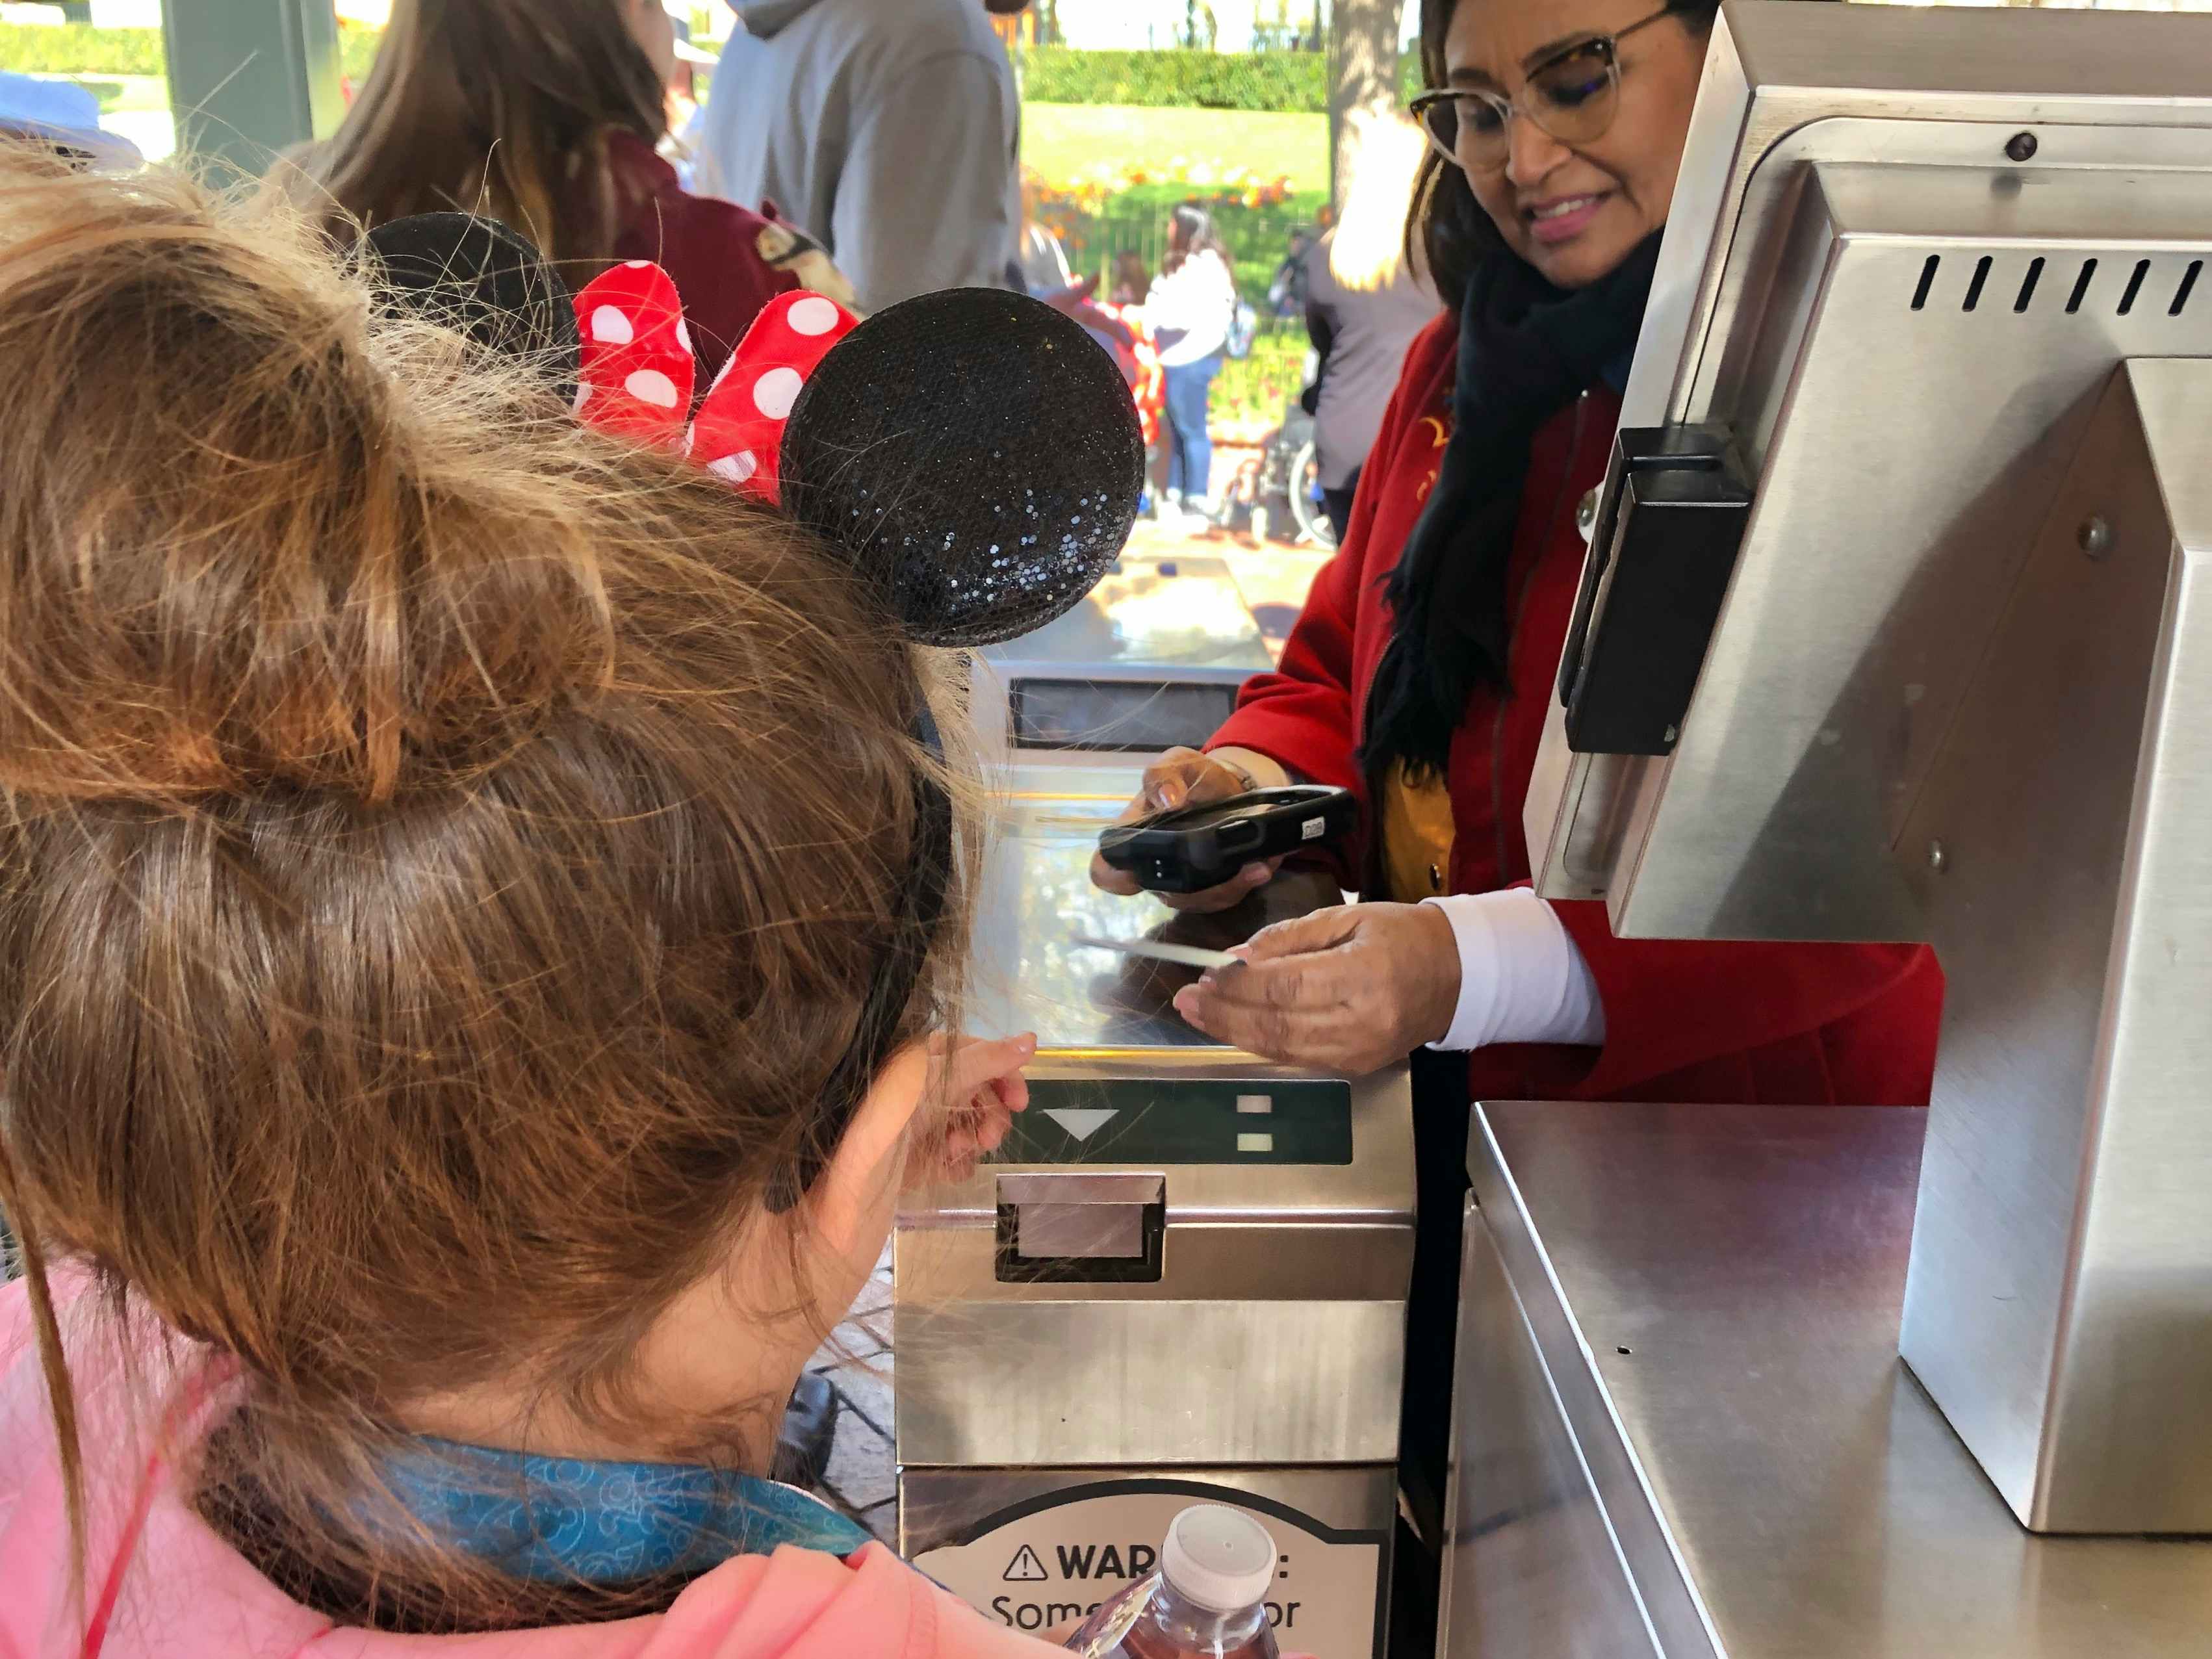 A little girl scans her ticket at the entrance of Disneyland